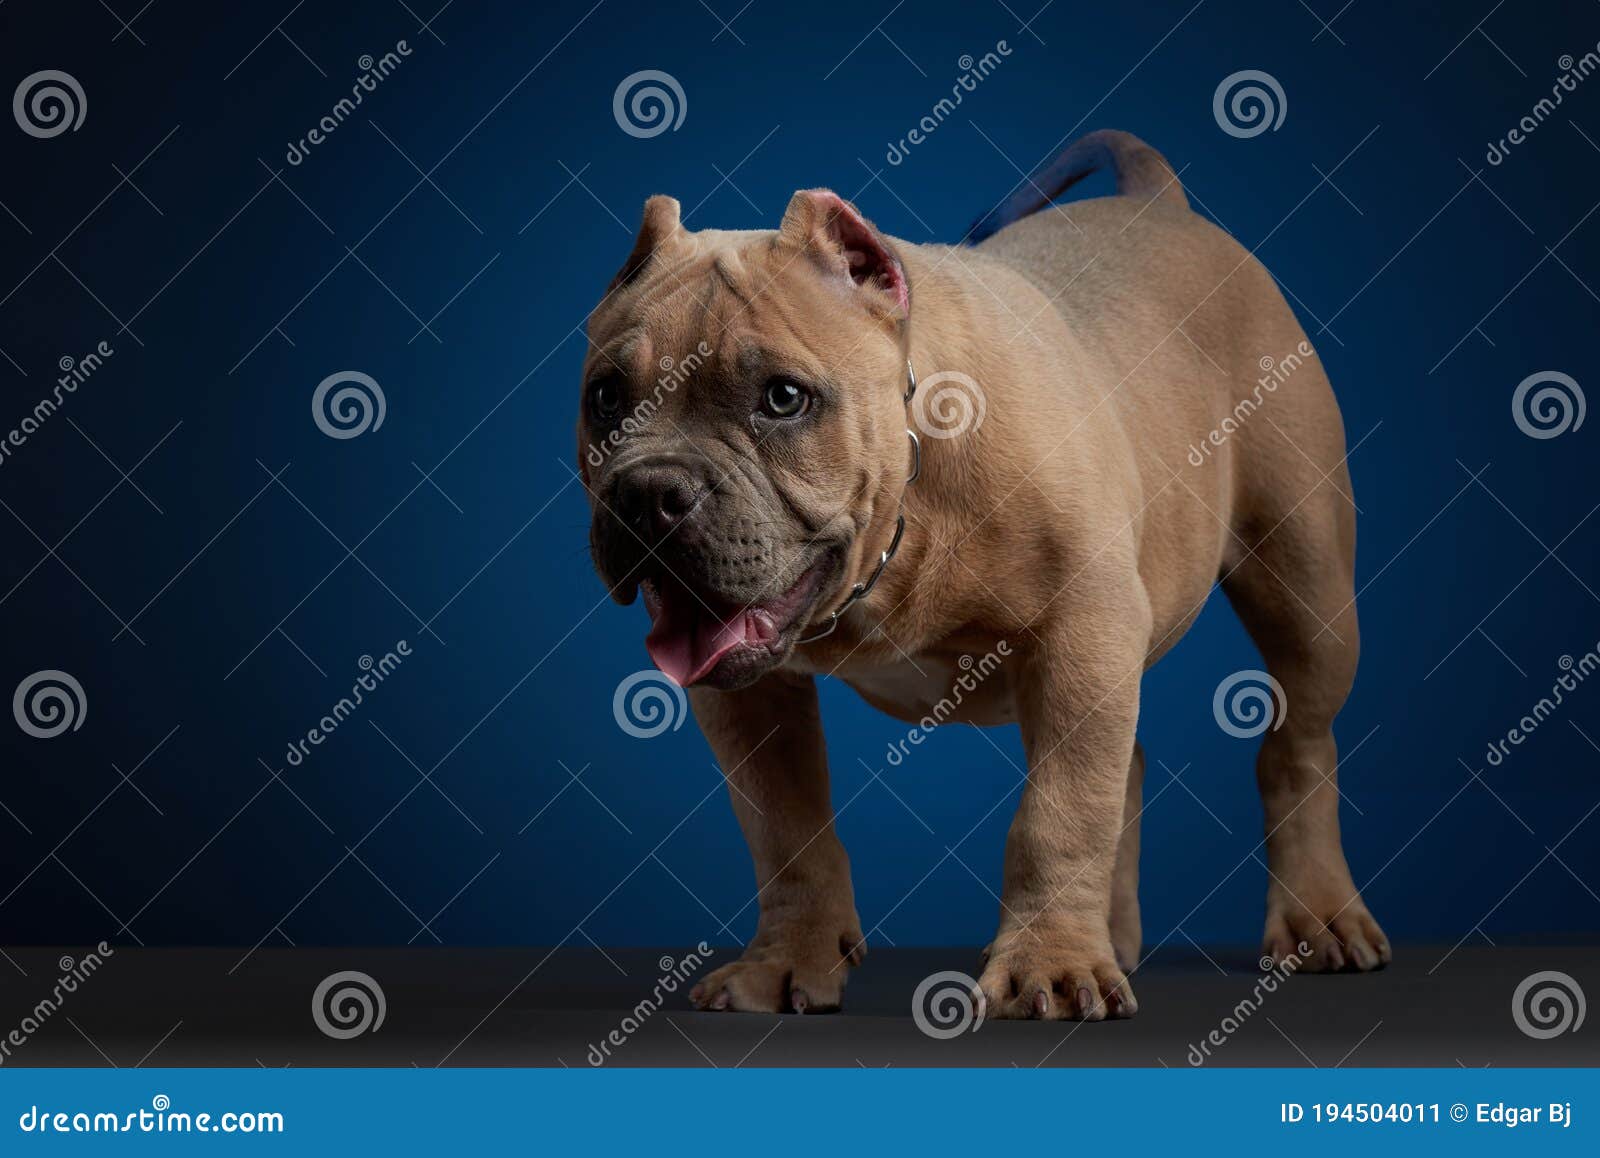 brown puppy on chain, standing and looking to the side